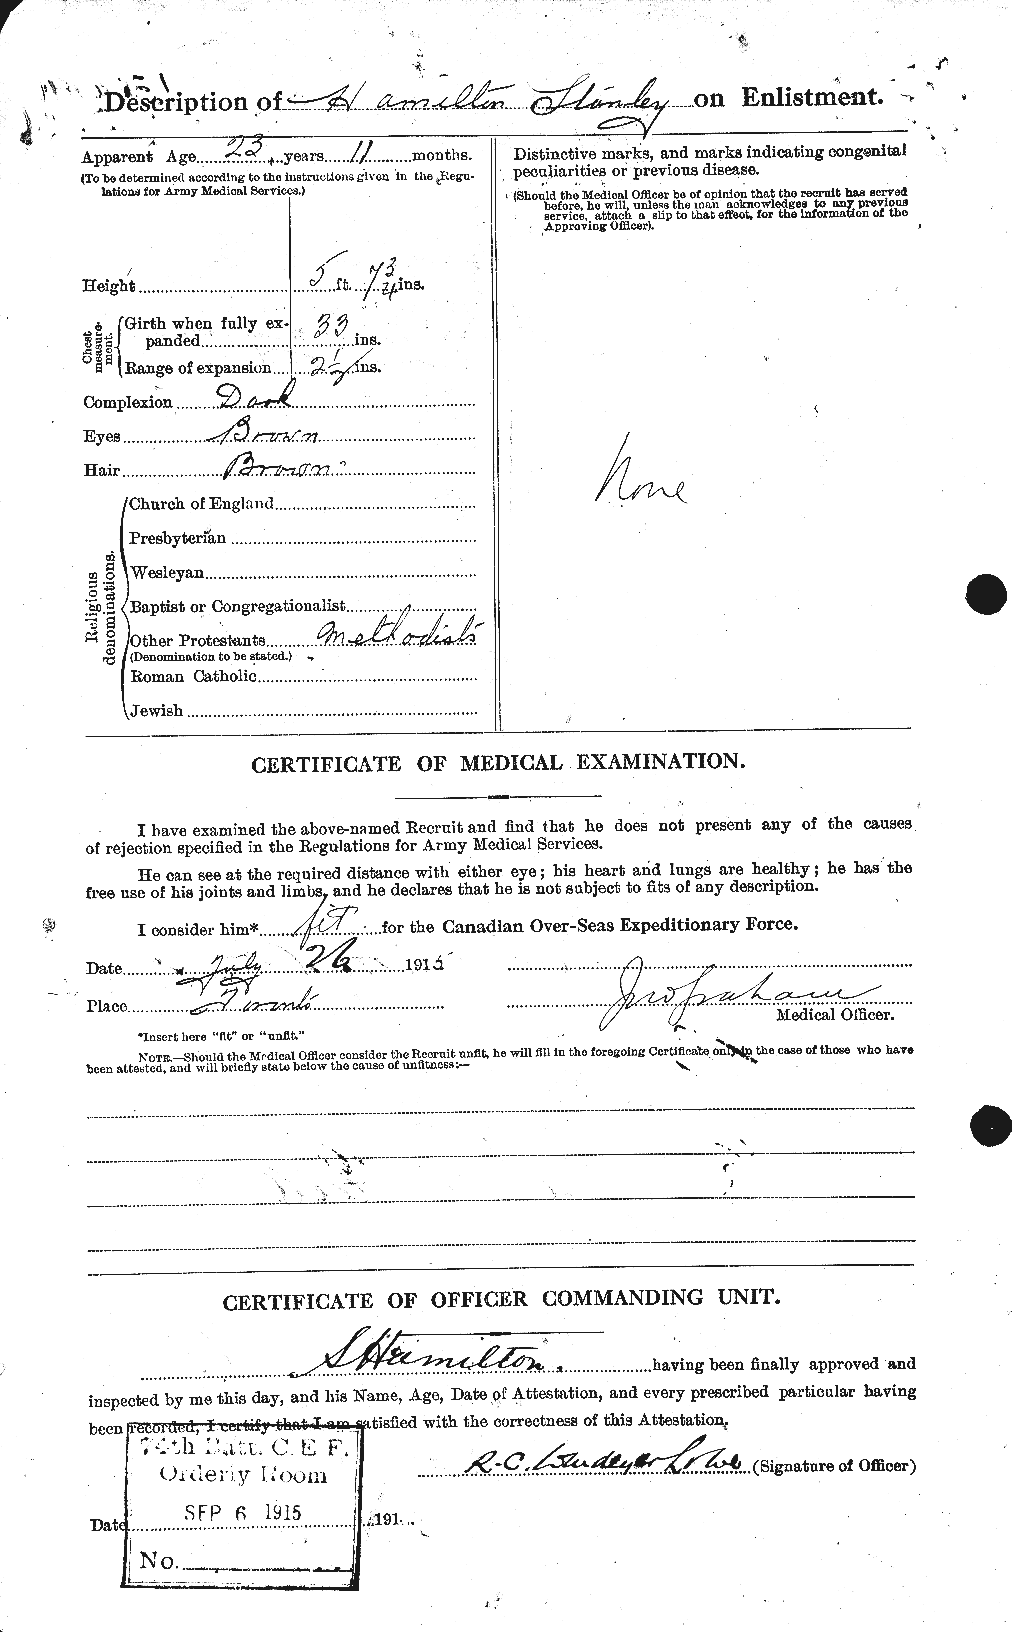 Personnel Records of the First World War - CEF 373317b